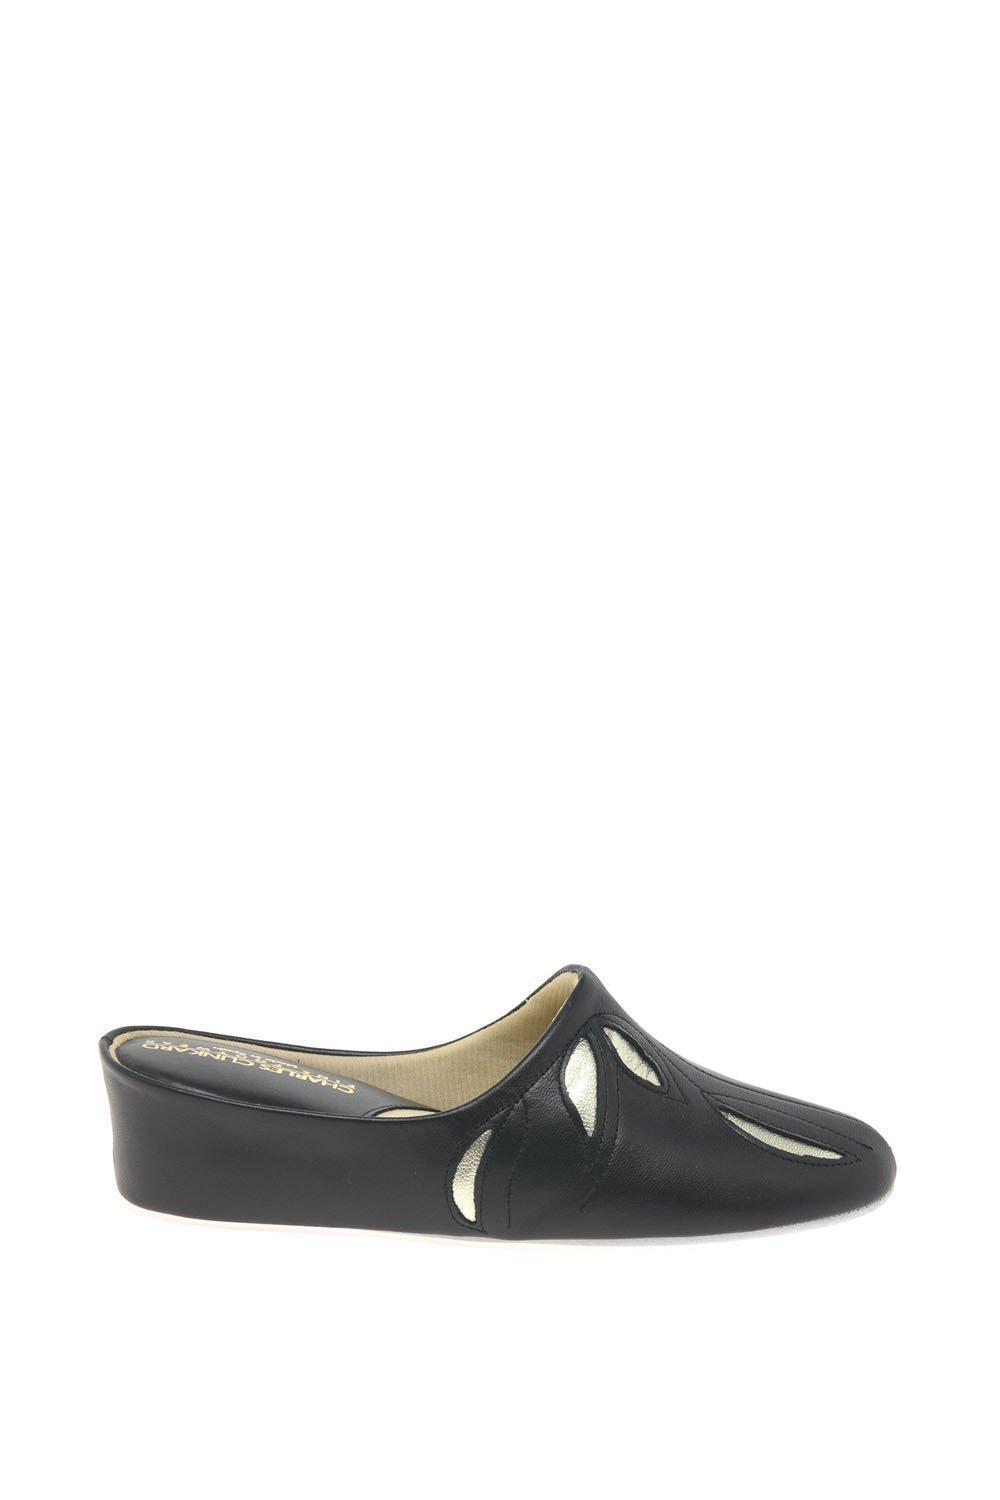 Charles Clinkard Women's 'Molly' Leather Slippers|Size: 6|black